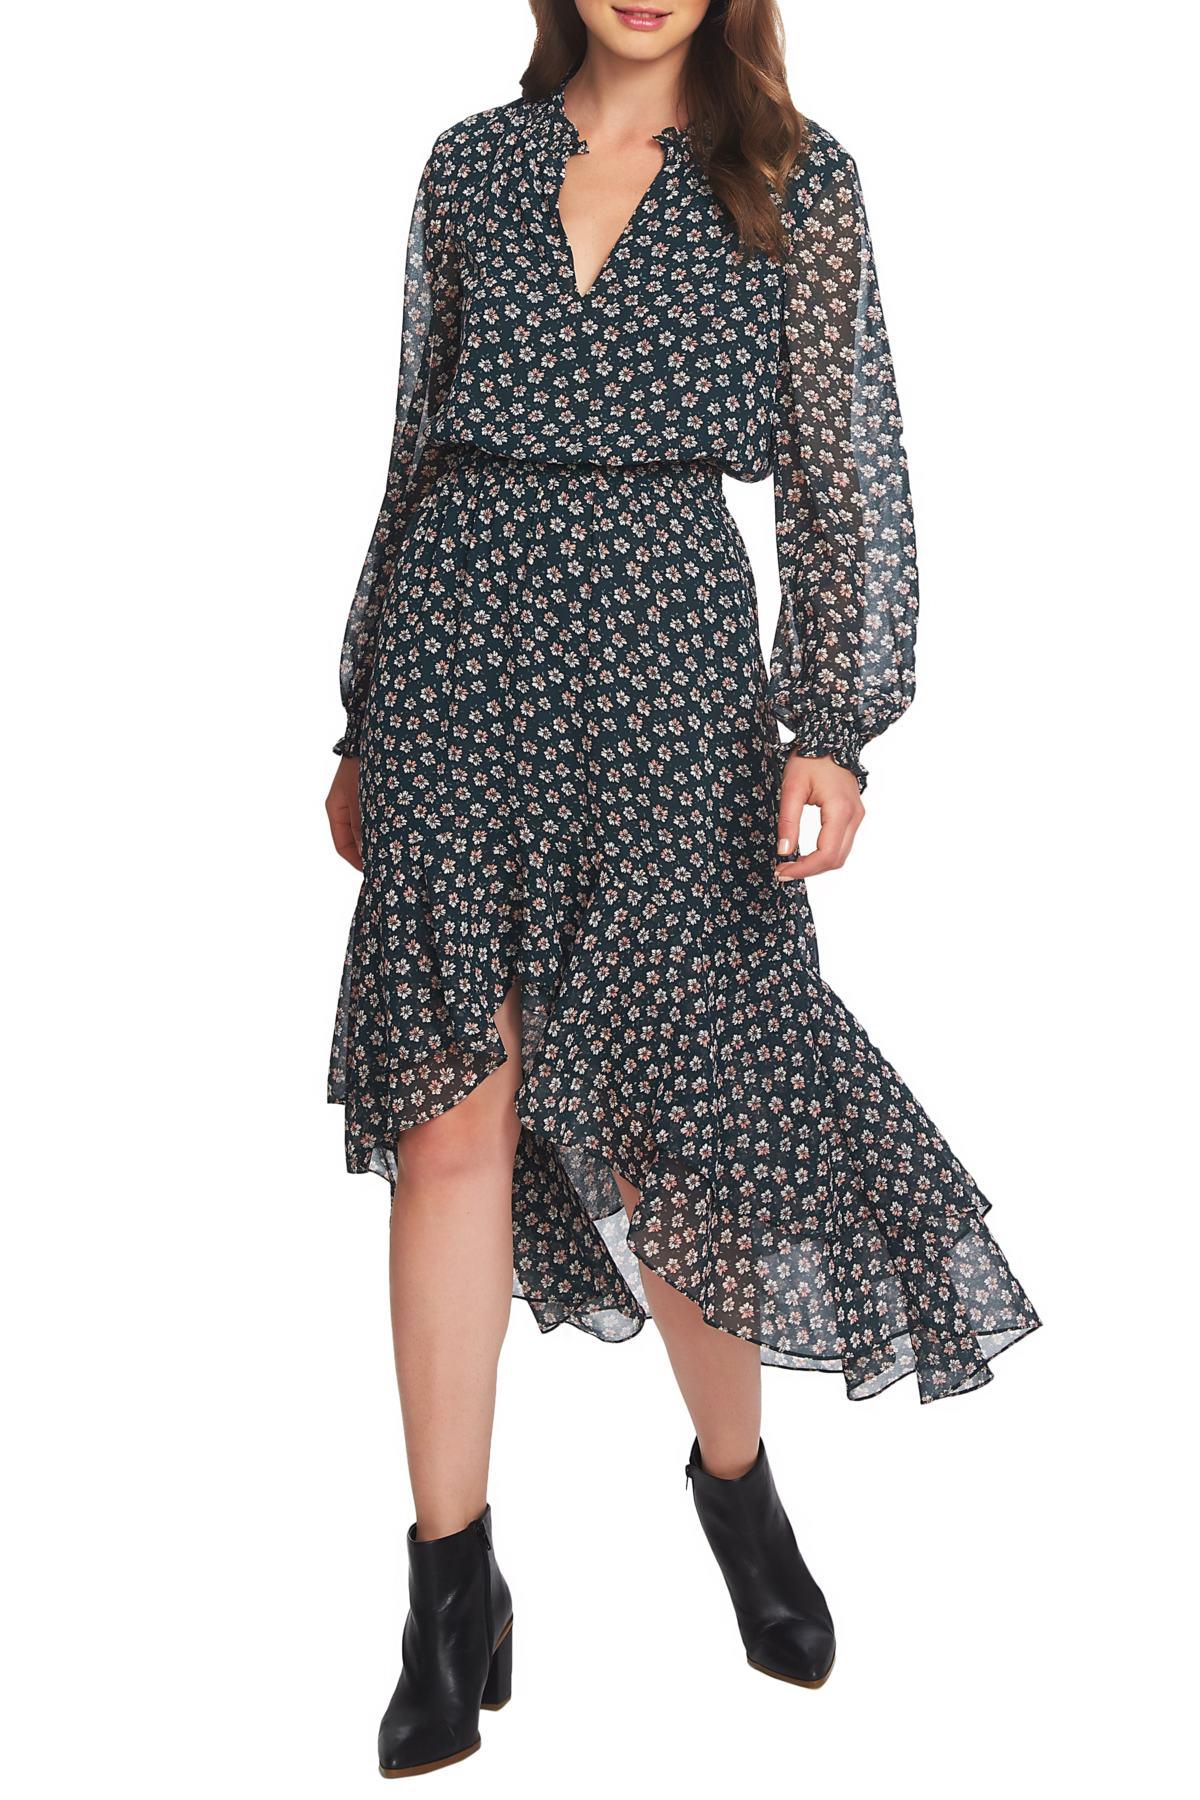 1.STATE High Low Floral Dress Lyst